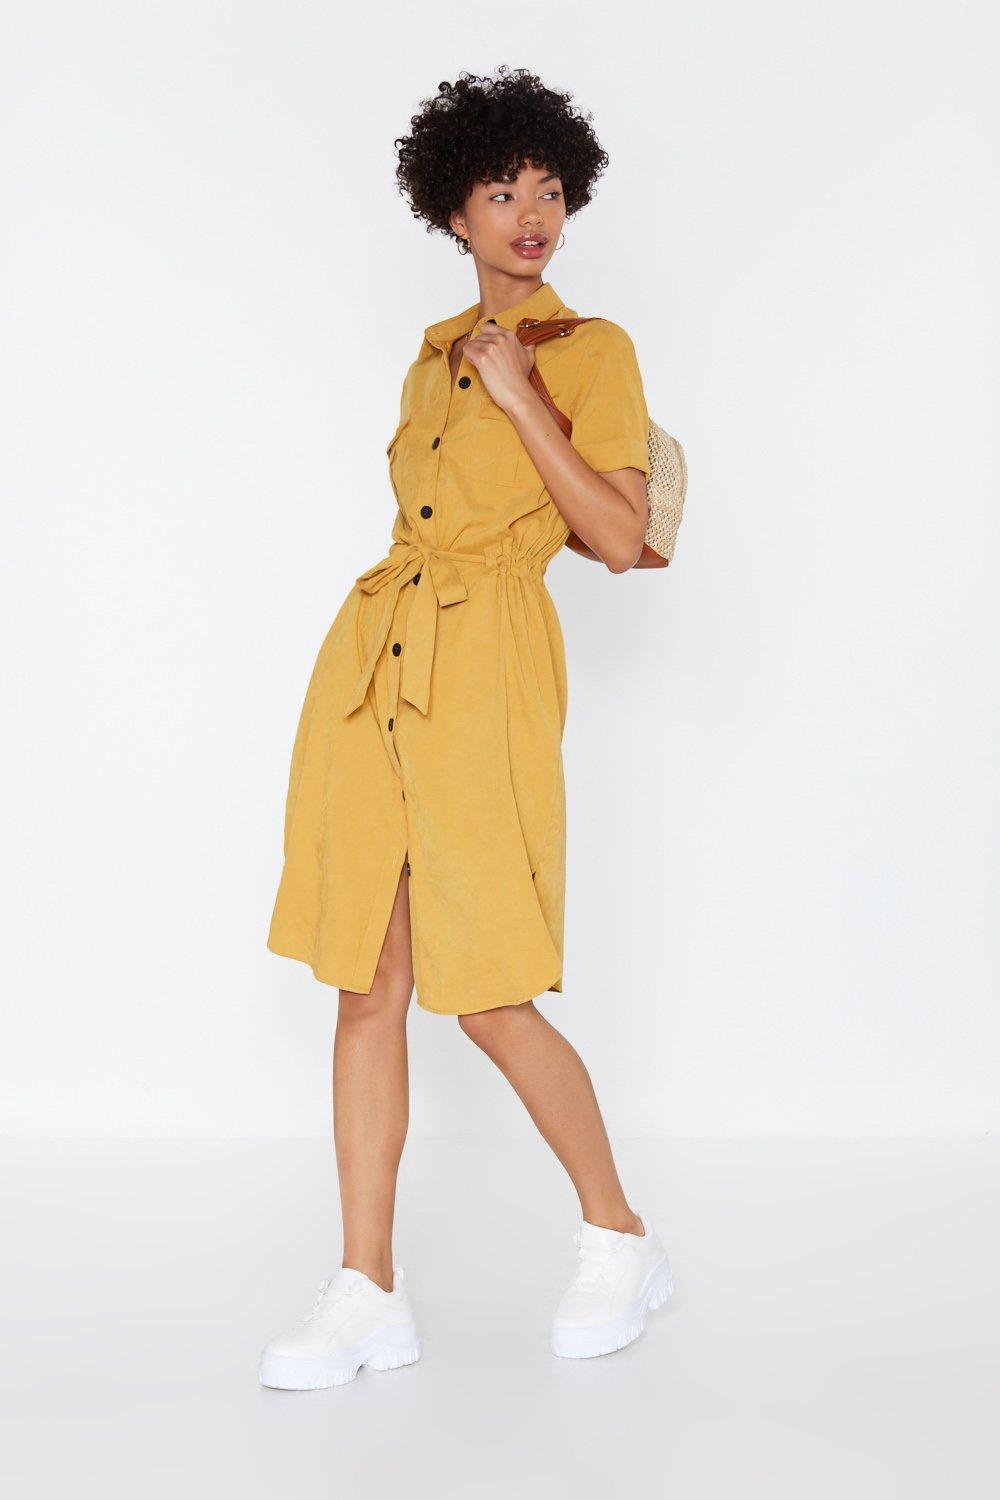 mustard yellow dress with buttons